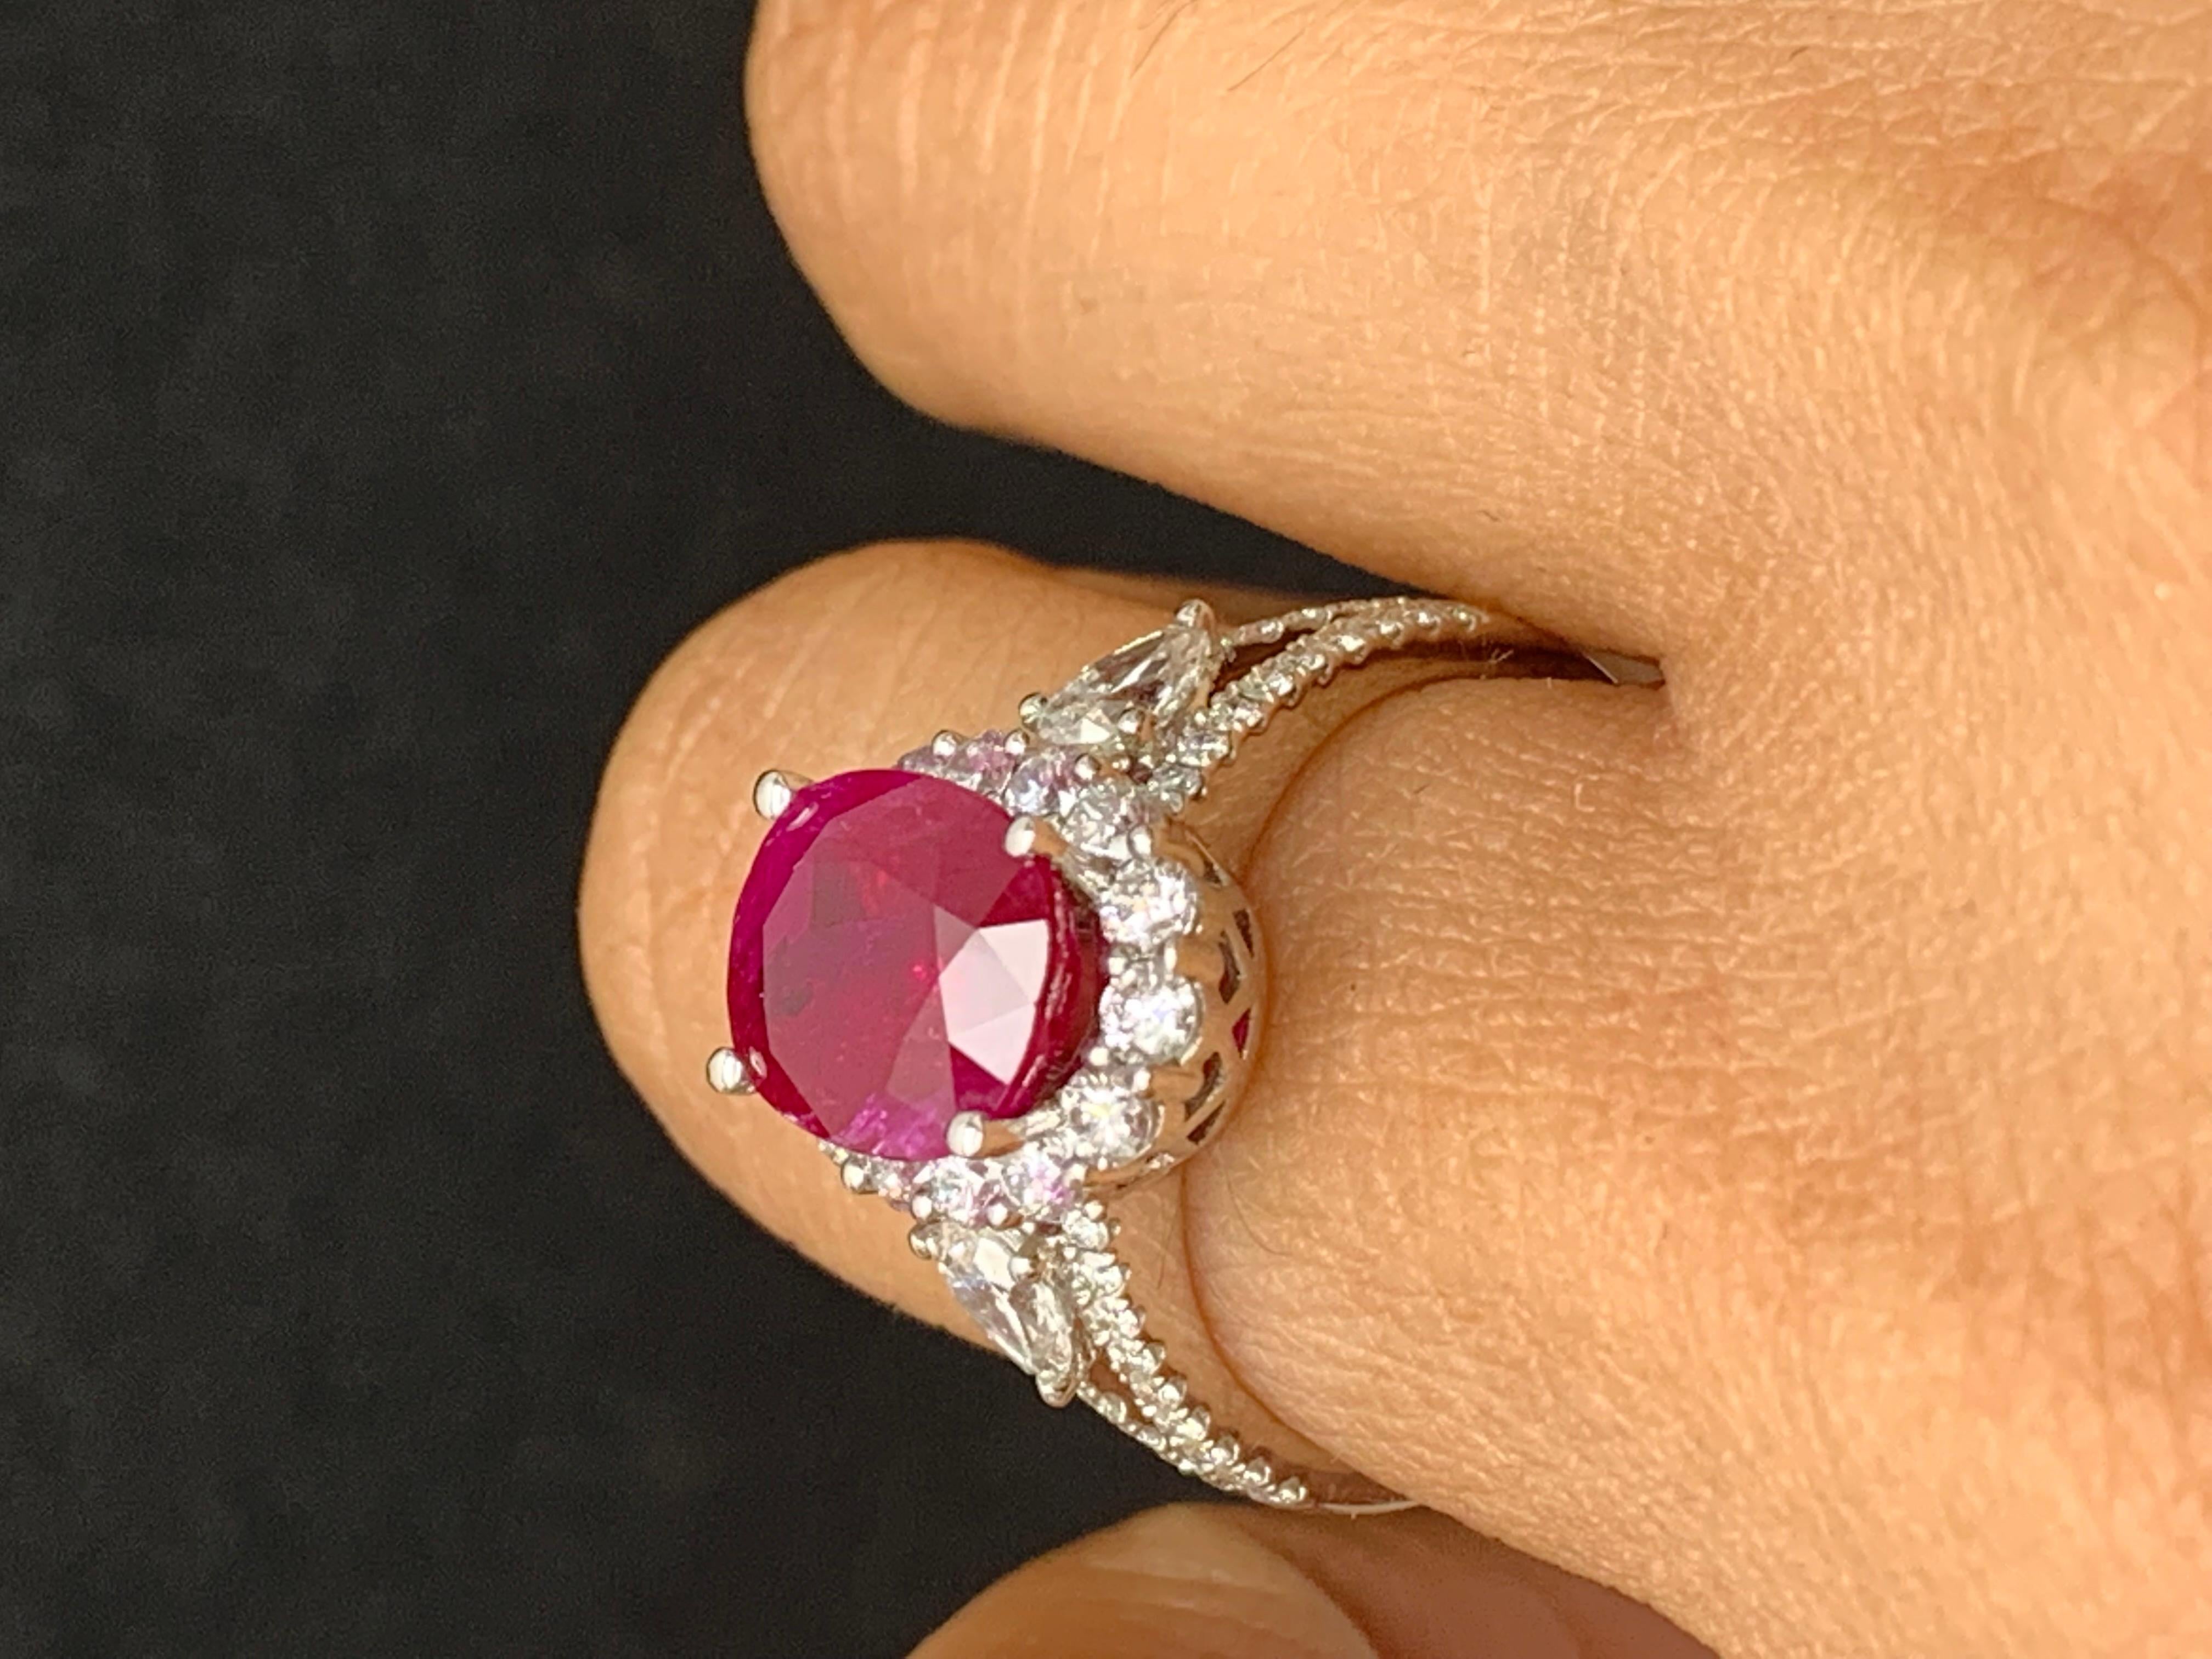 3.58 Carat Oval Cut Ruby and Diamond Halo Ring in 18K White Gold For Sale 7